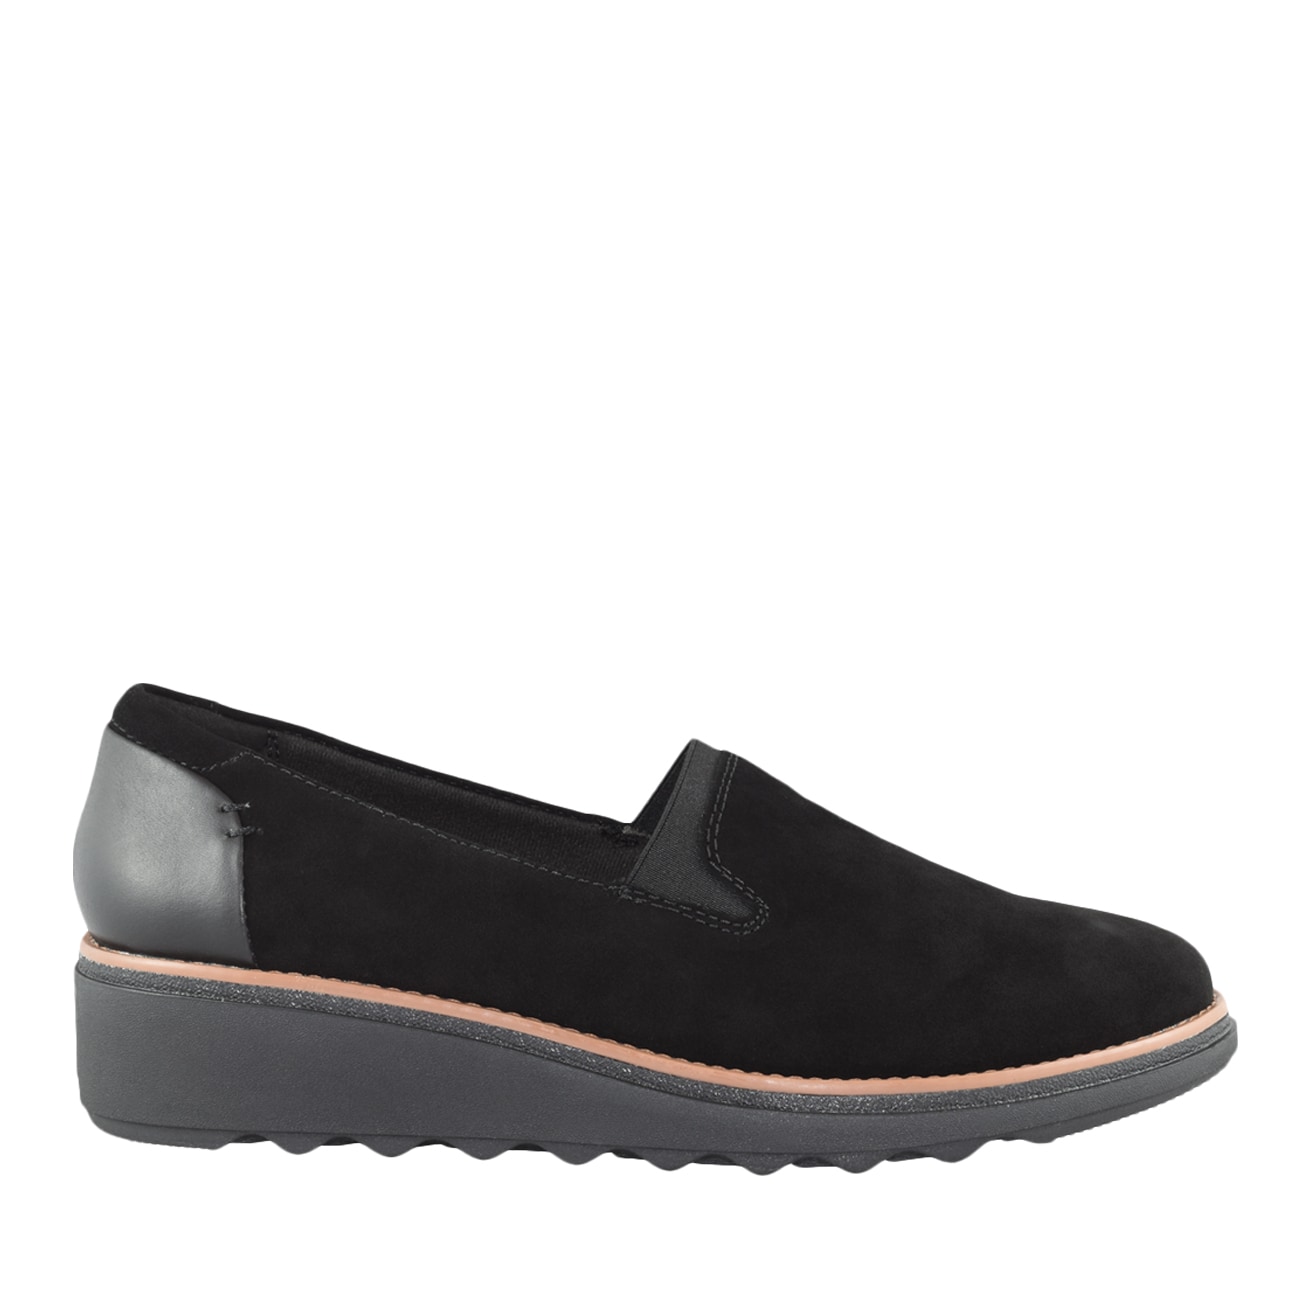 clarks online shopping canada